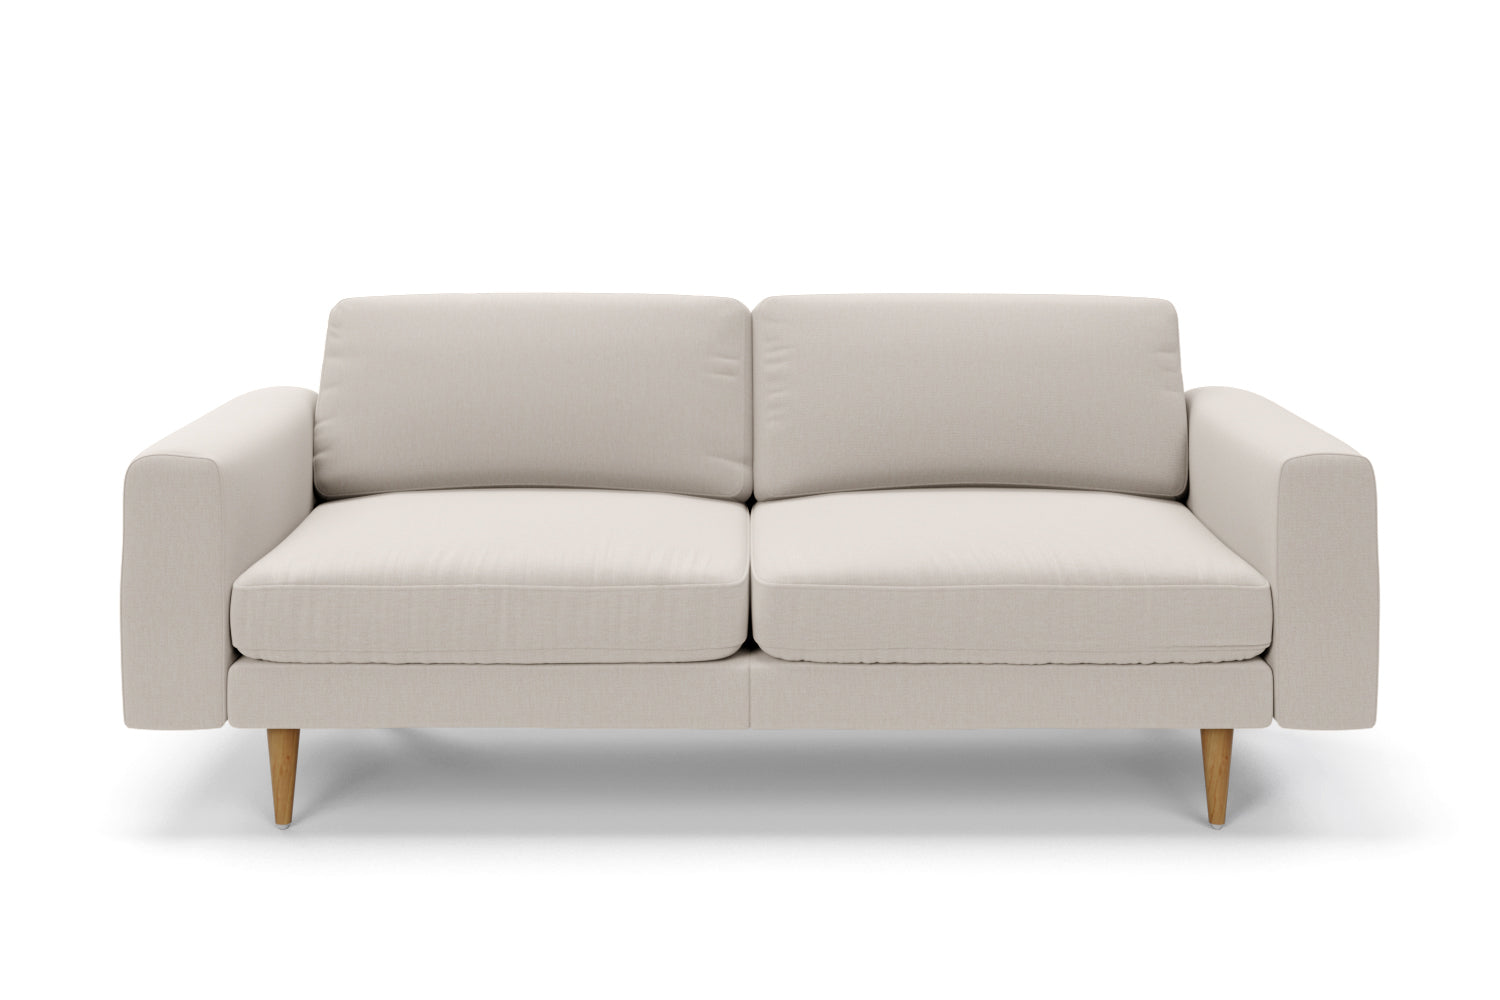 SNUG | The Big Chill 3 Seater Sofa in Biscuit variant_40520492941360